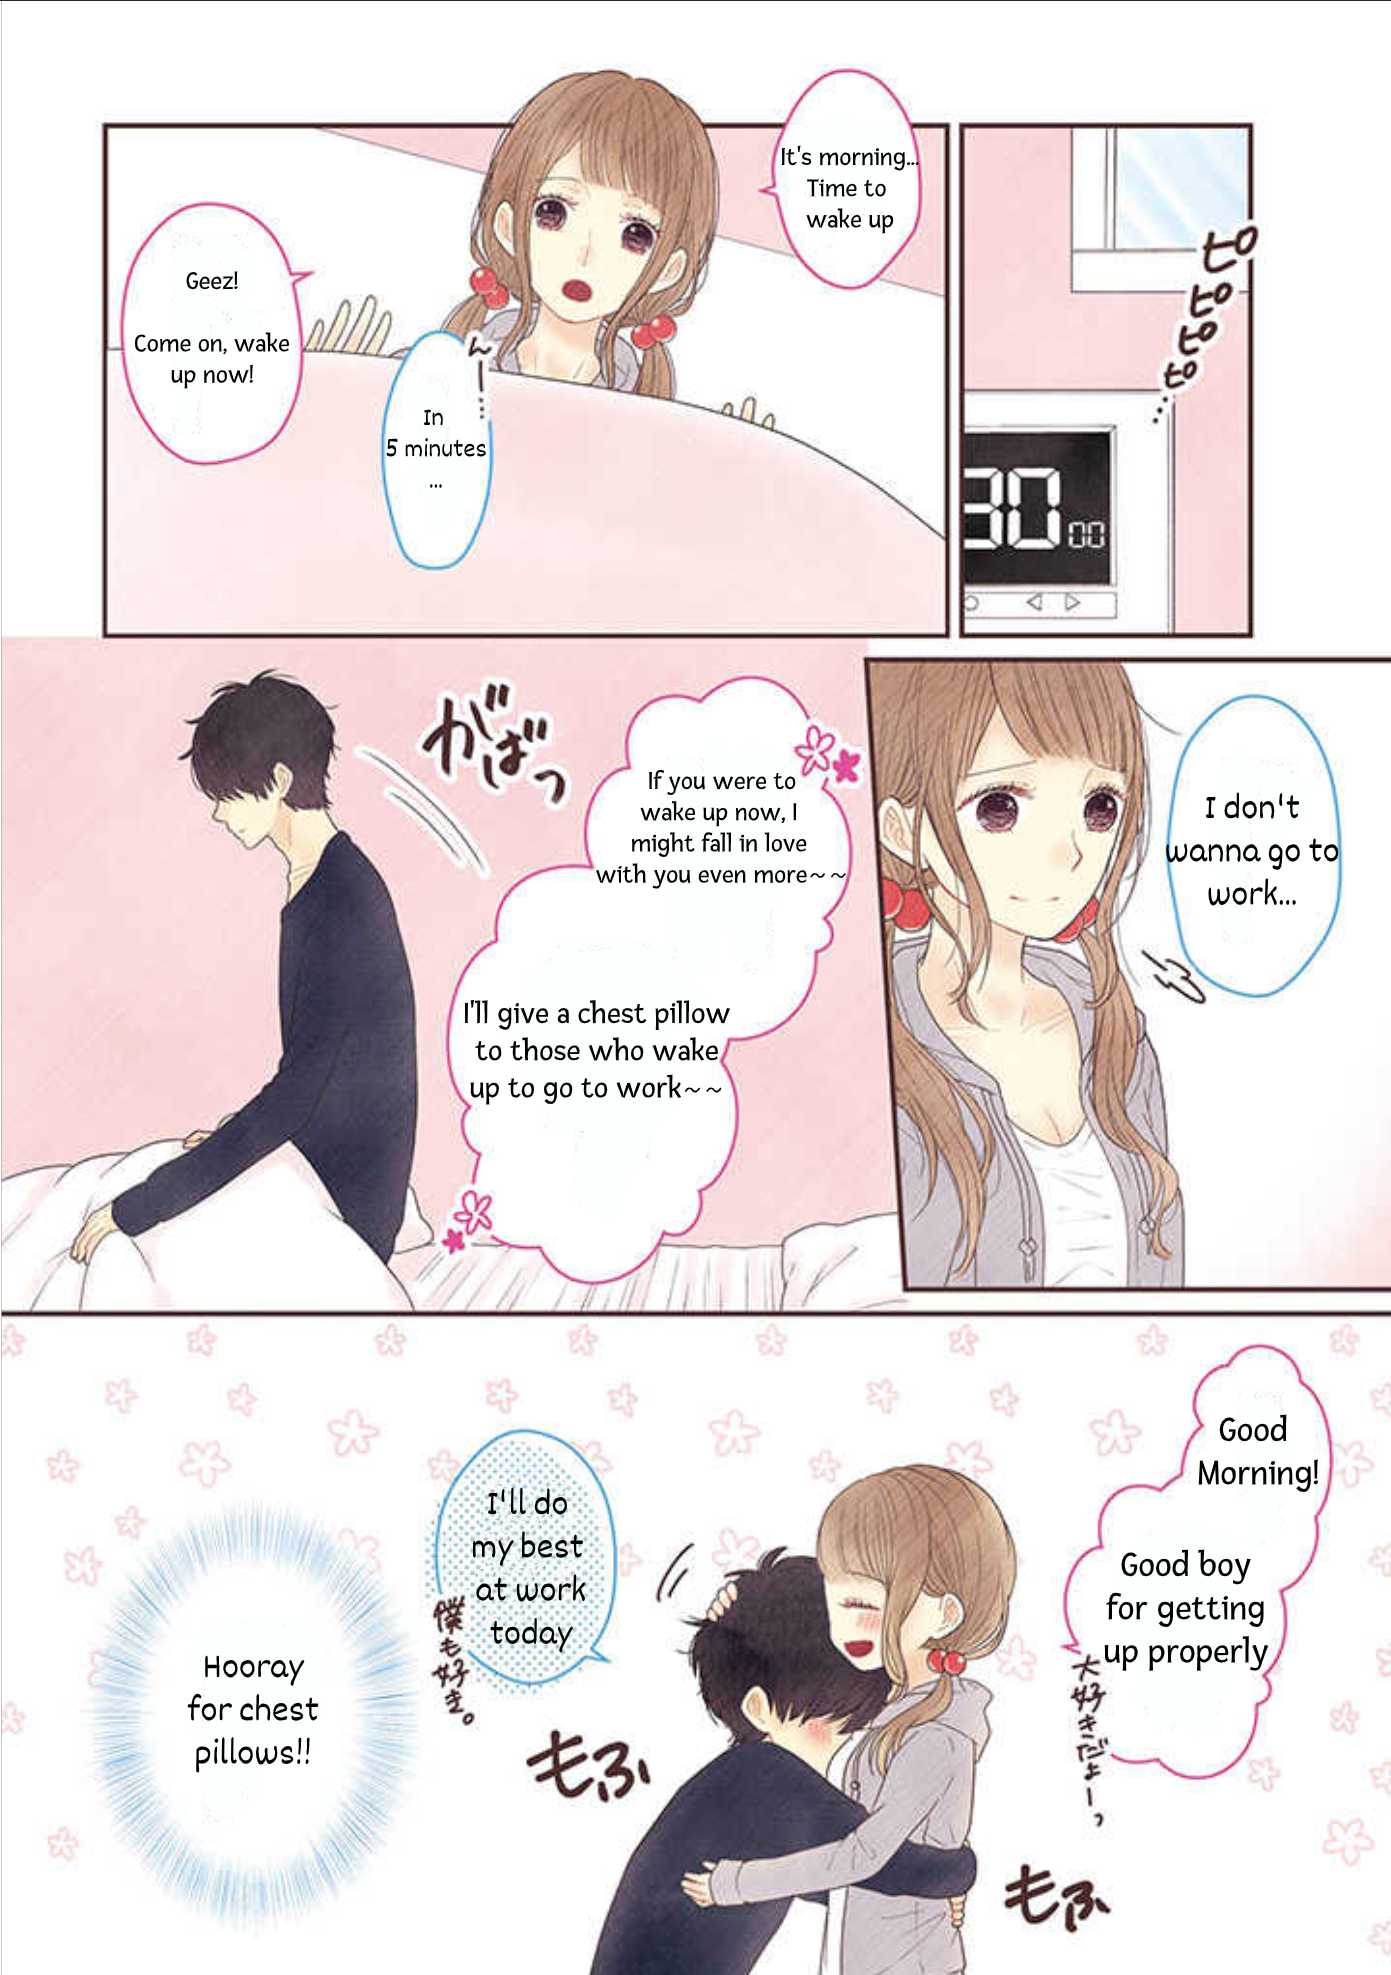 My Girlfriend Is A Futon Girl Vol.1 Chapter 1: My Girlfriend Is A Futon Girl - Picture 2